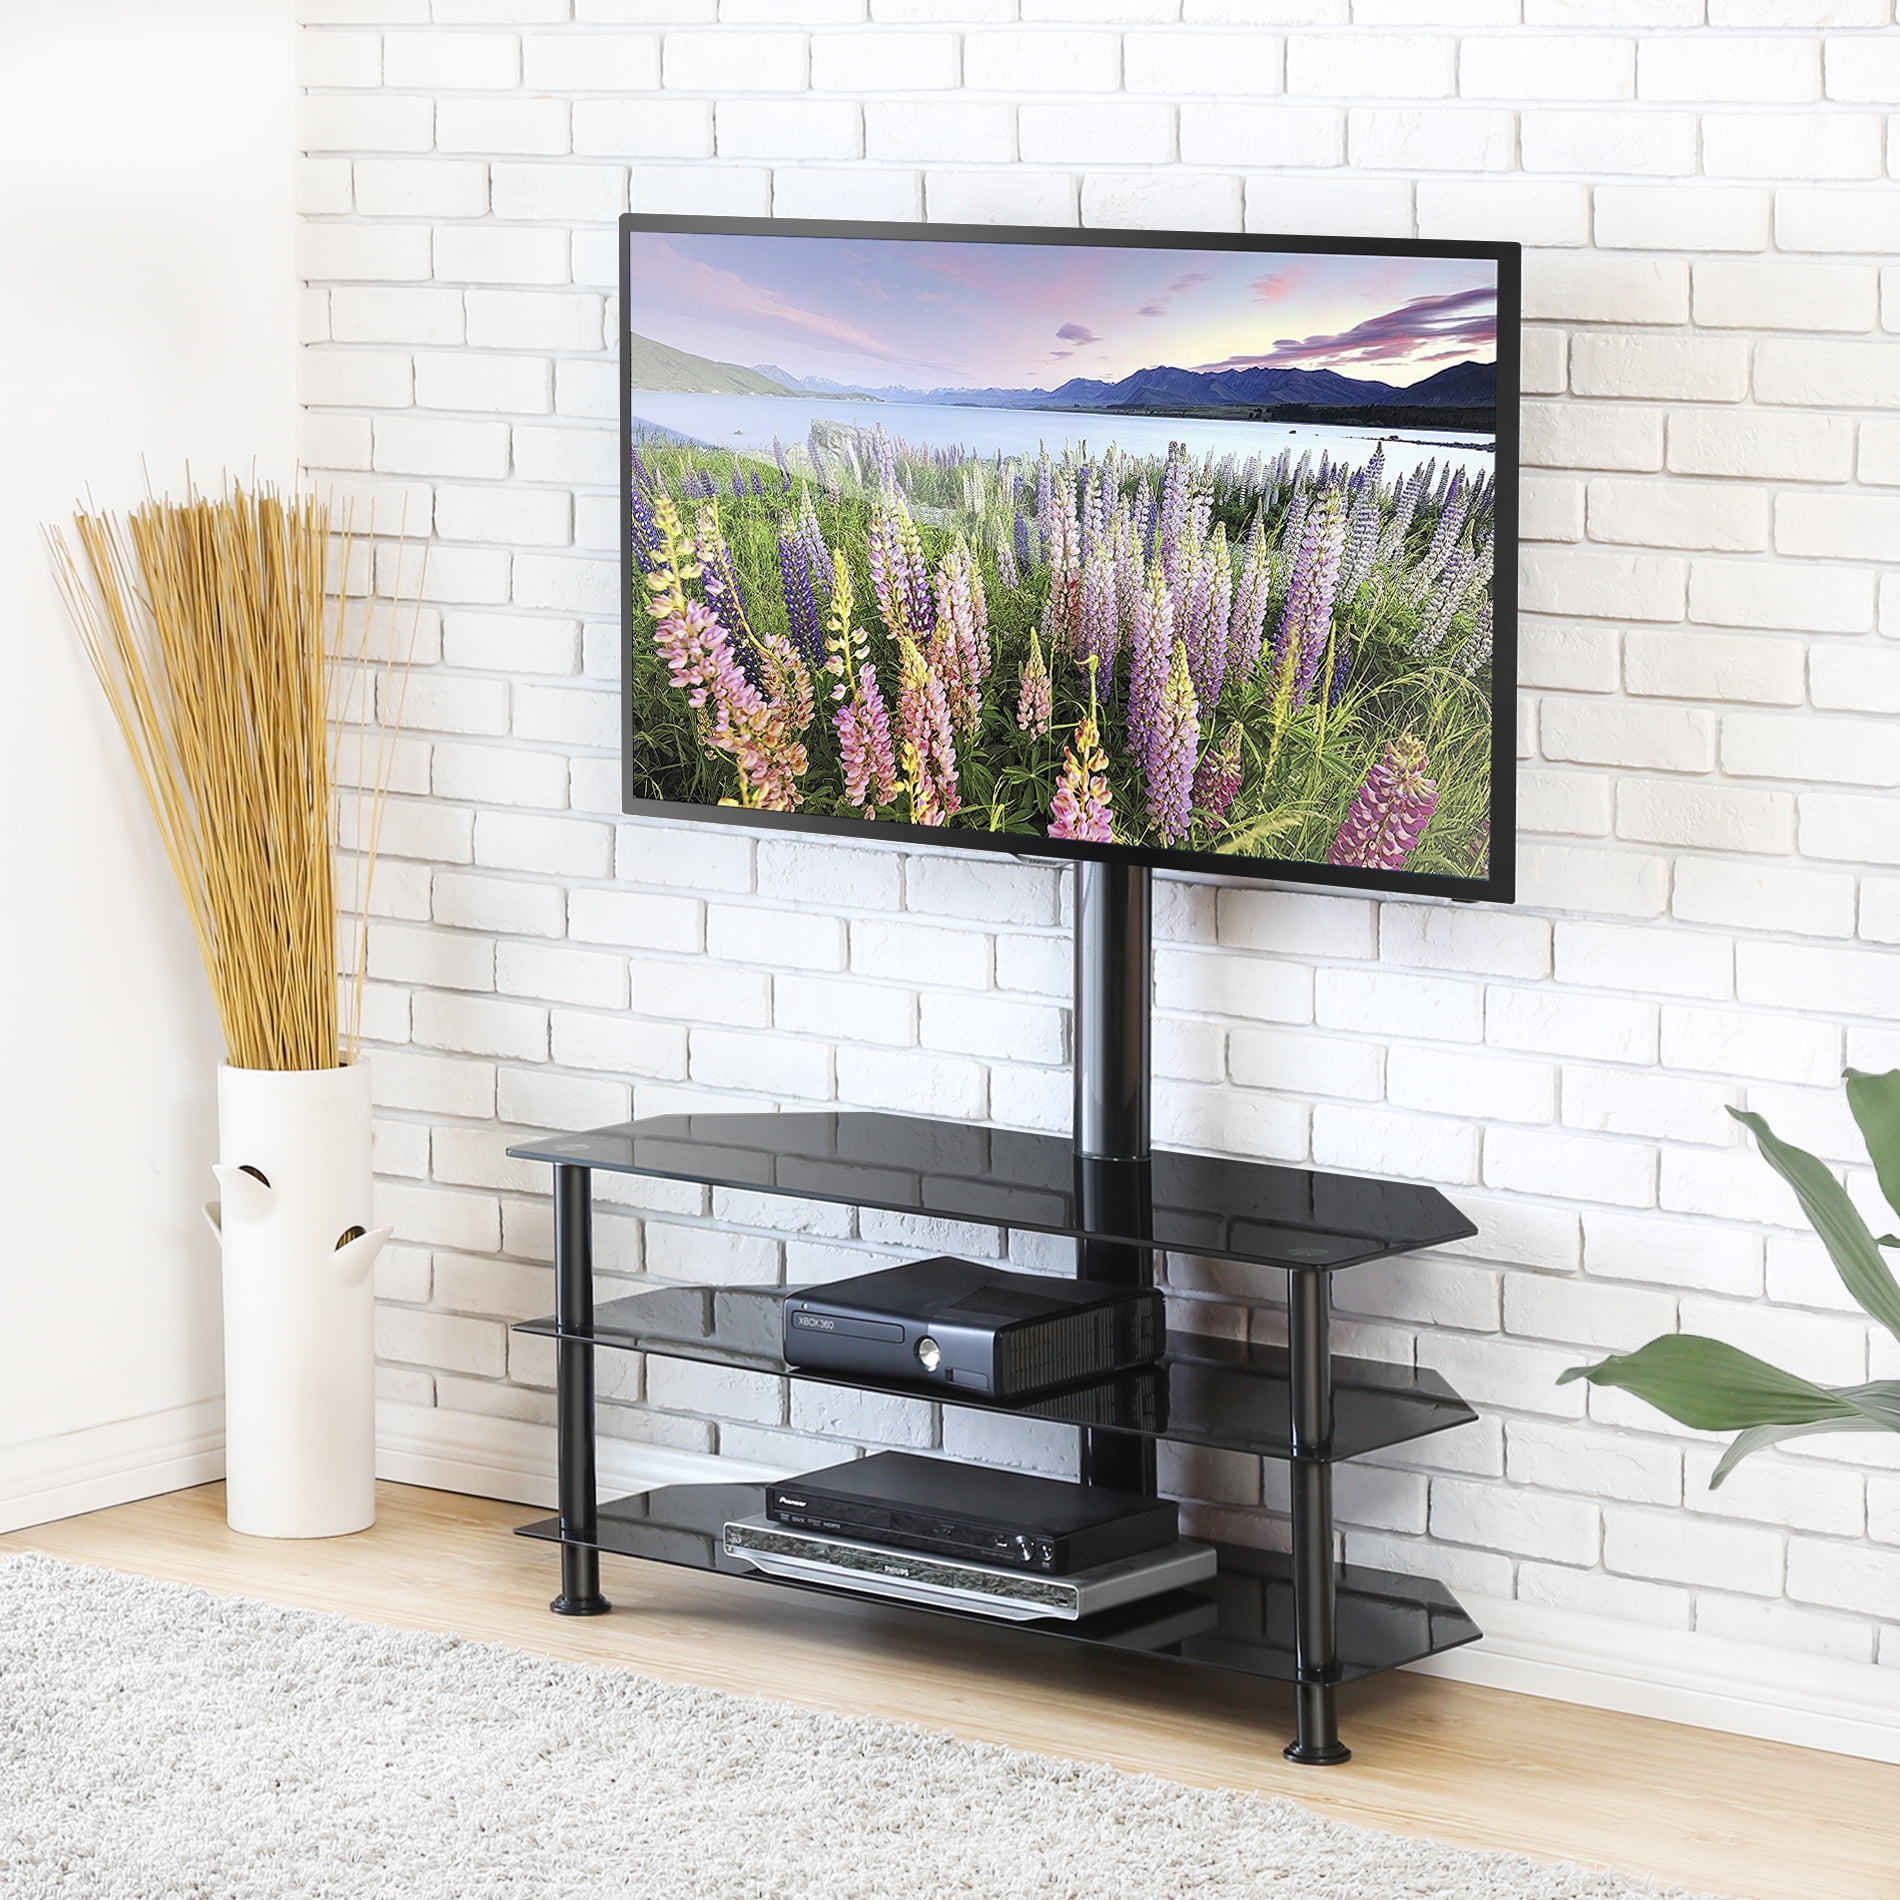 FITUEYES Swivel TV Stand with Height Adjustable Mount 3